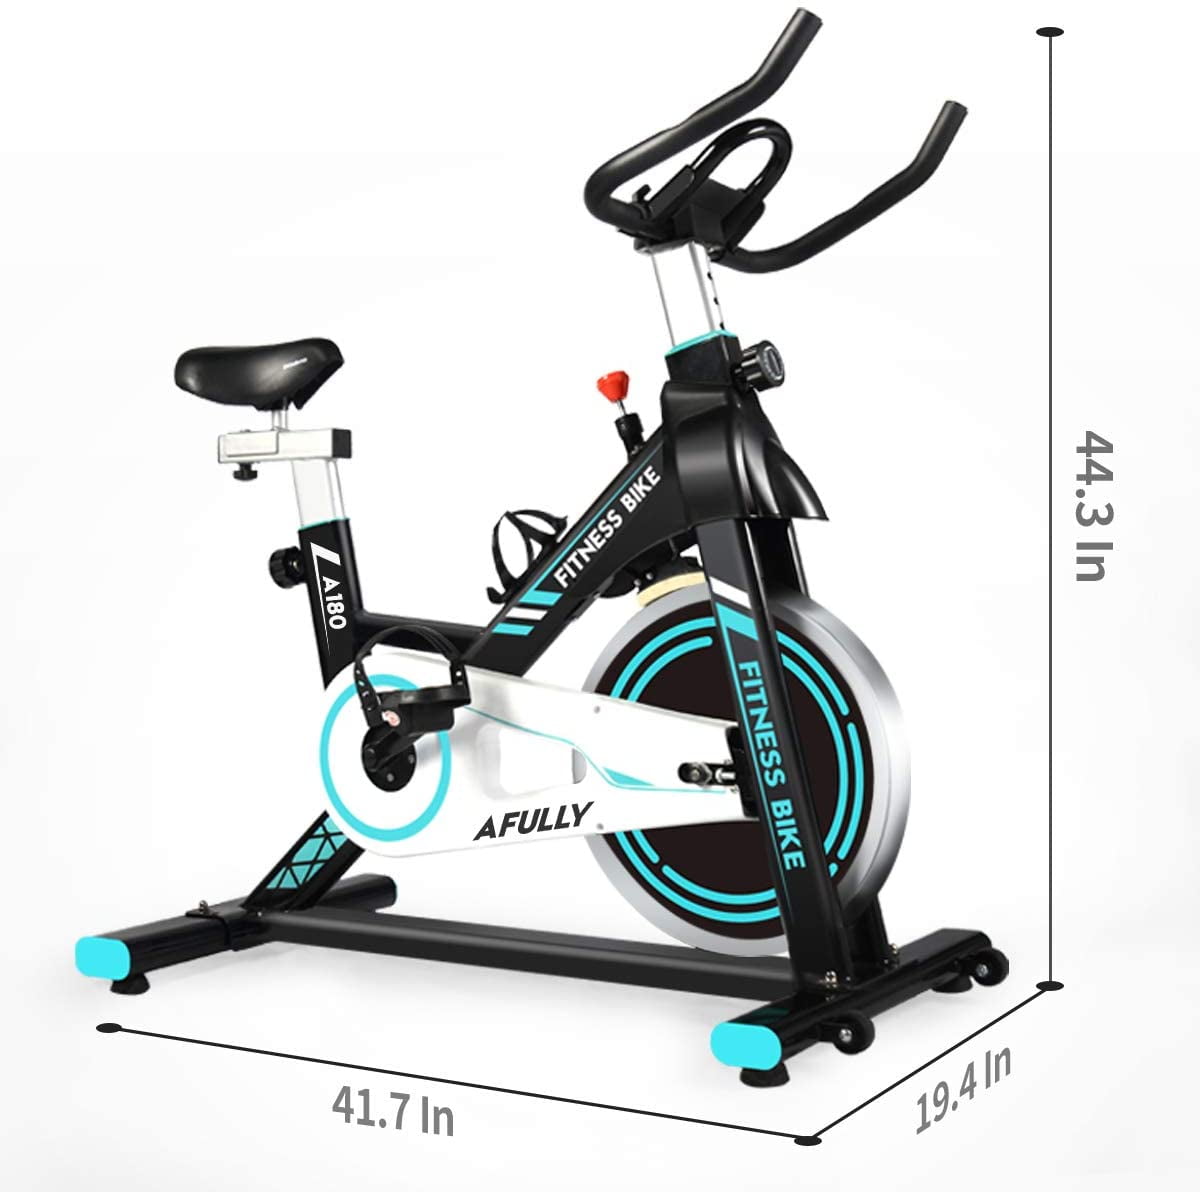 Afully Indoor Exercise Bike Pad/Phone Holder Indoor Cycling Stationary Bike Belt Drive with Adjustable Resistance LCD Monitor Comfortable Cushion Stable and Quiet for Home Cardio Workout 